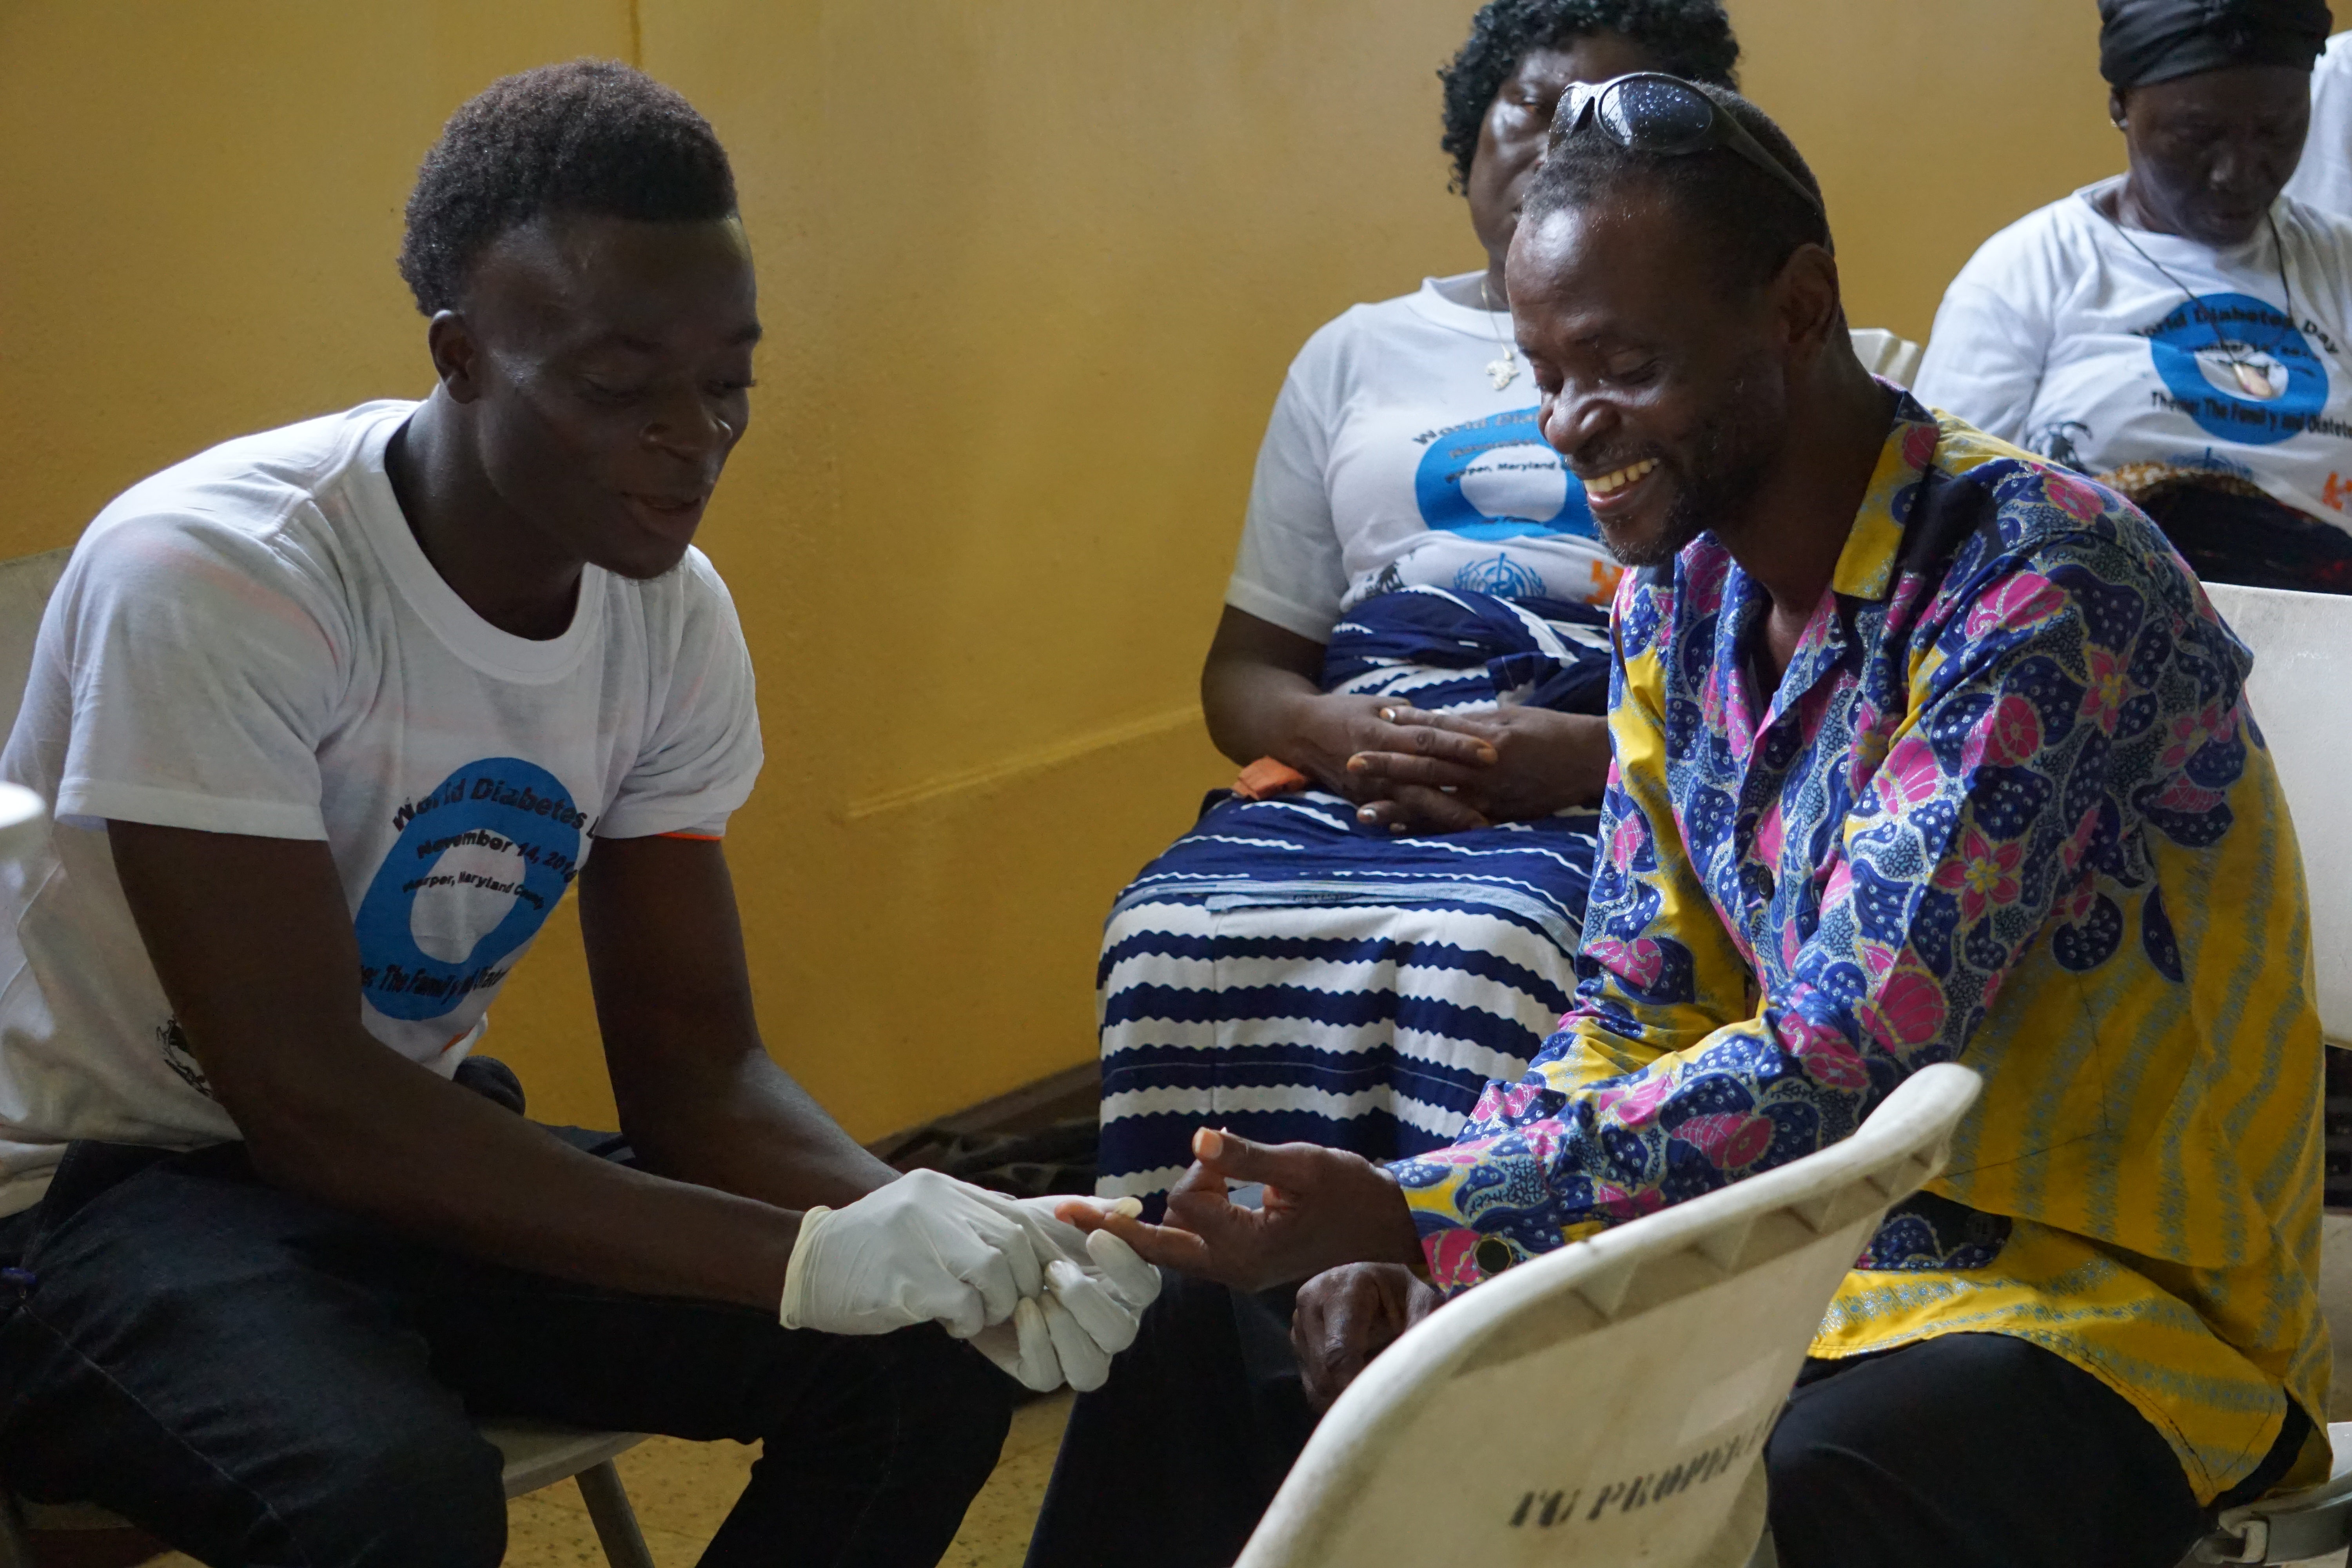 Diabetes patient in Liberia undergoes a blood sugar check